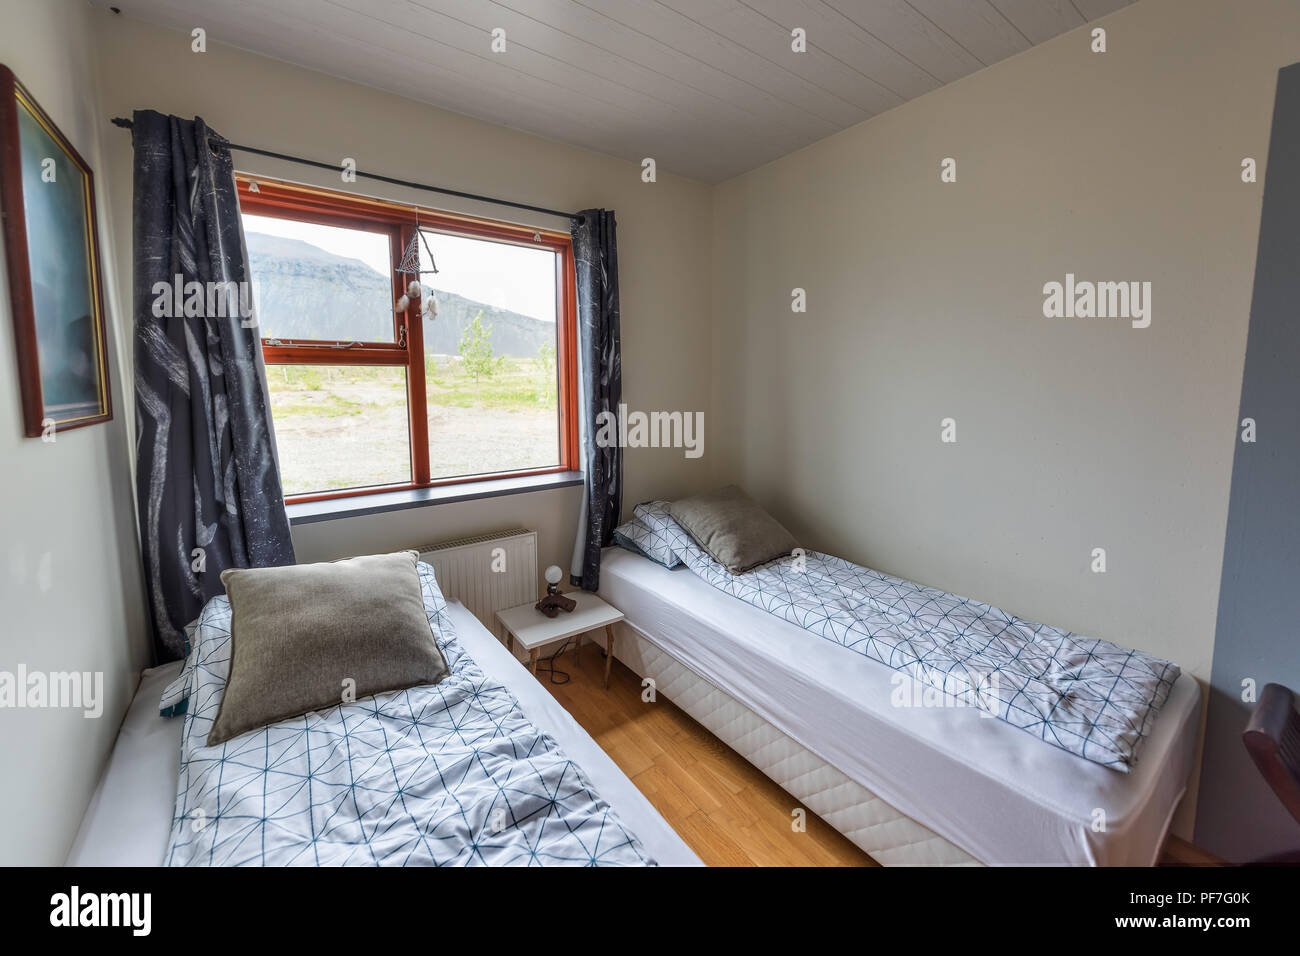 https://c8.alamy.com/comp/PF7G0K/clean-european-twin-two-beds-comforter-with-table-lamp-decorations-window-in-bedroom-staging-model-home-guest-house-apartment-in-hostel-hotel-roo-PF7G0K.jpg